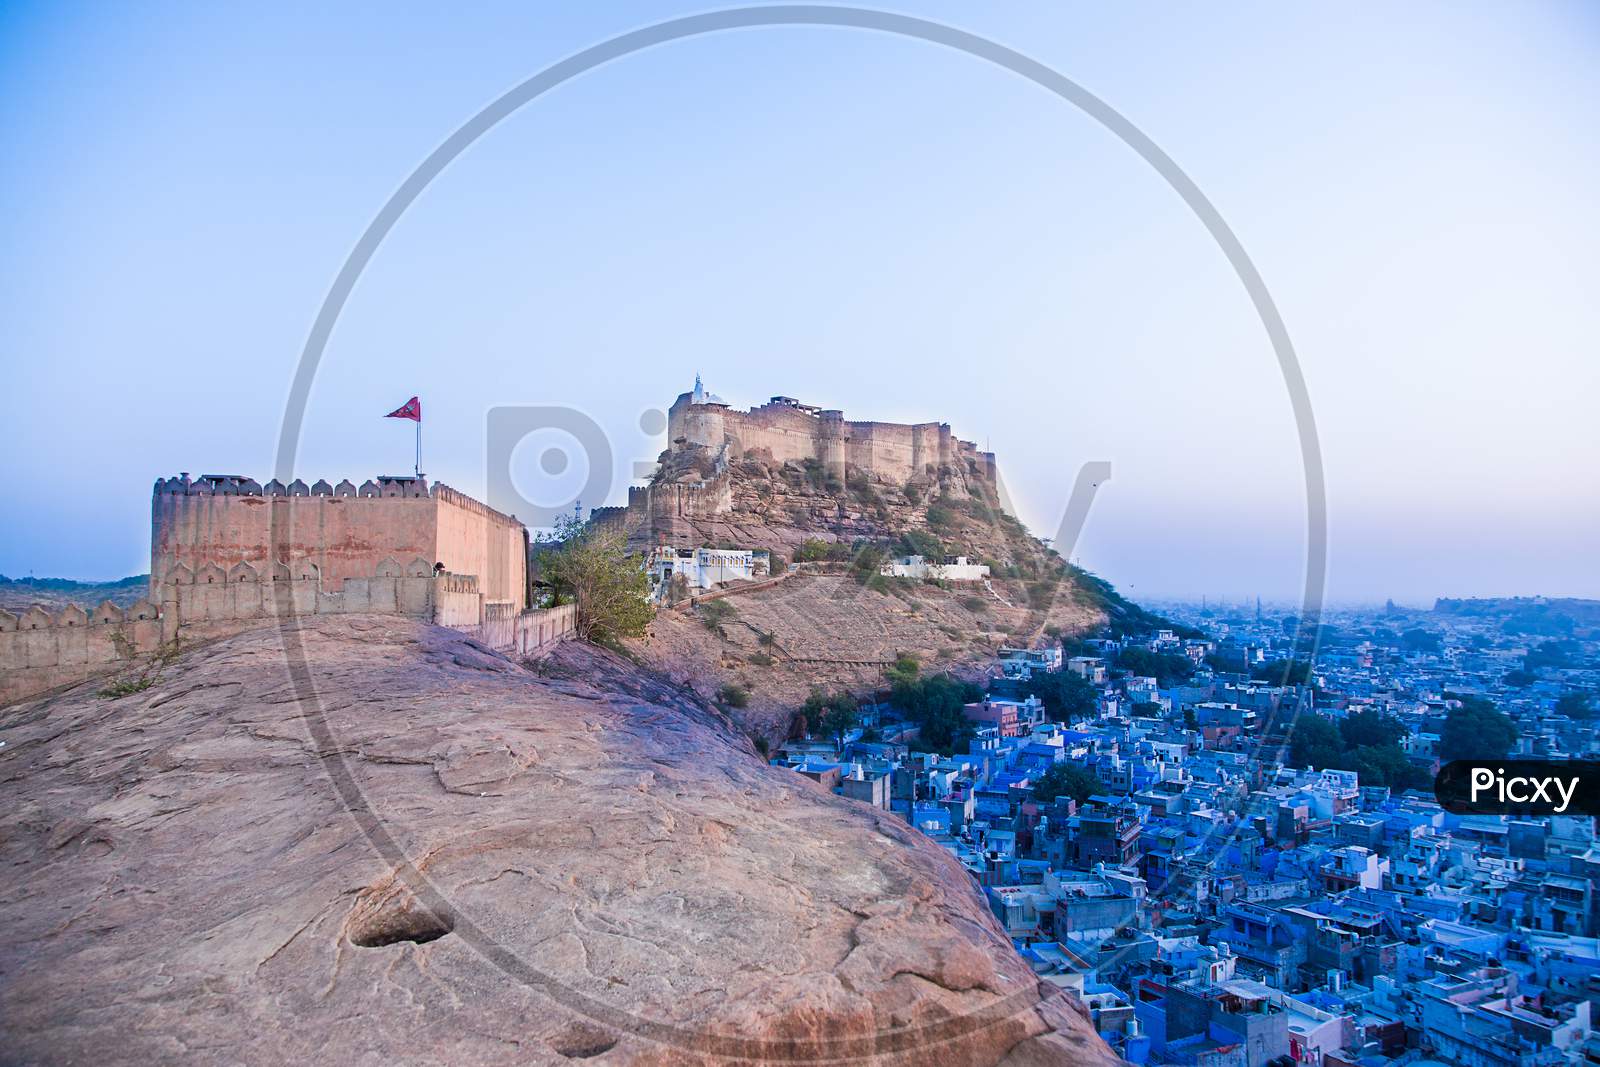 Blue City And Mehrangarh Fort On The Hill In Jodhpur, Rajasthan, India - Image